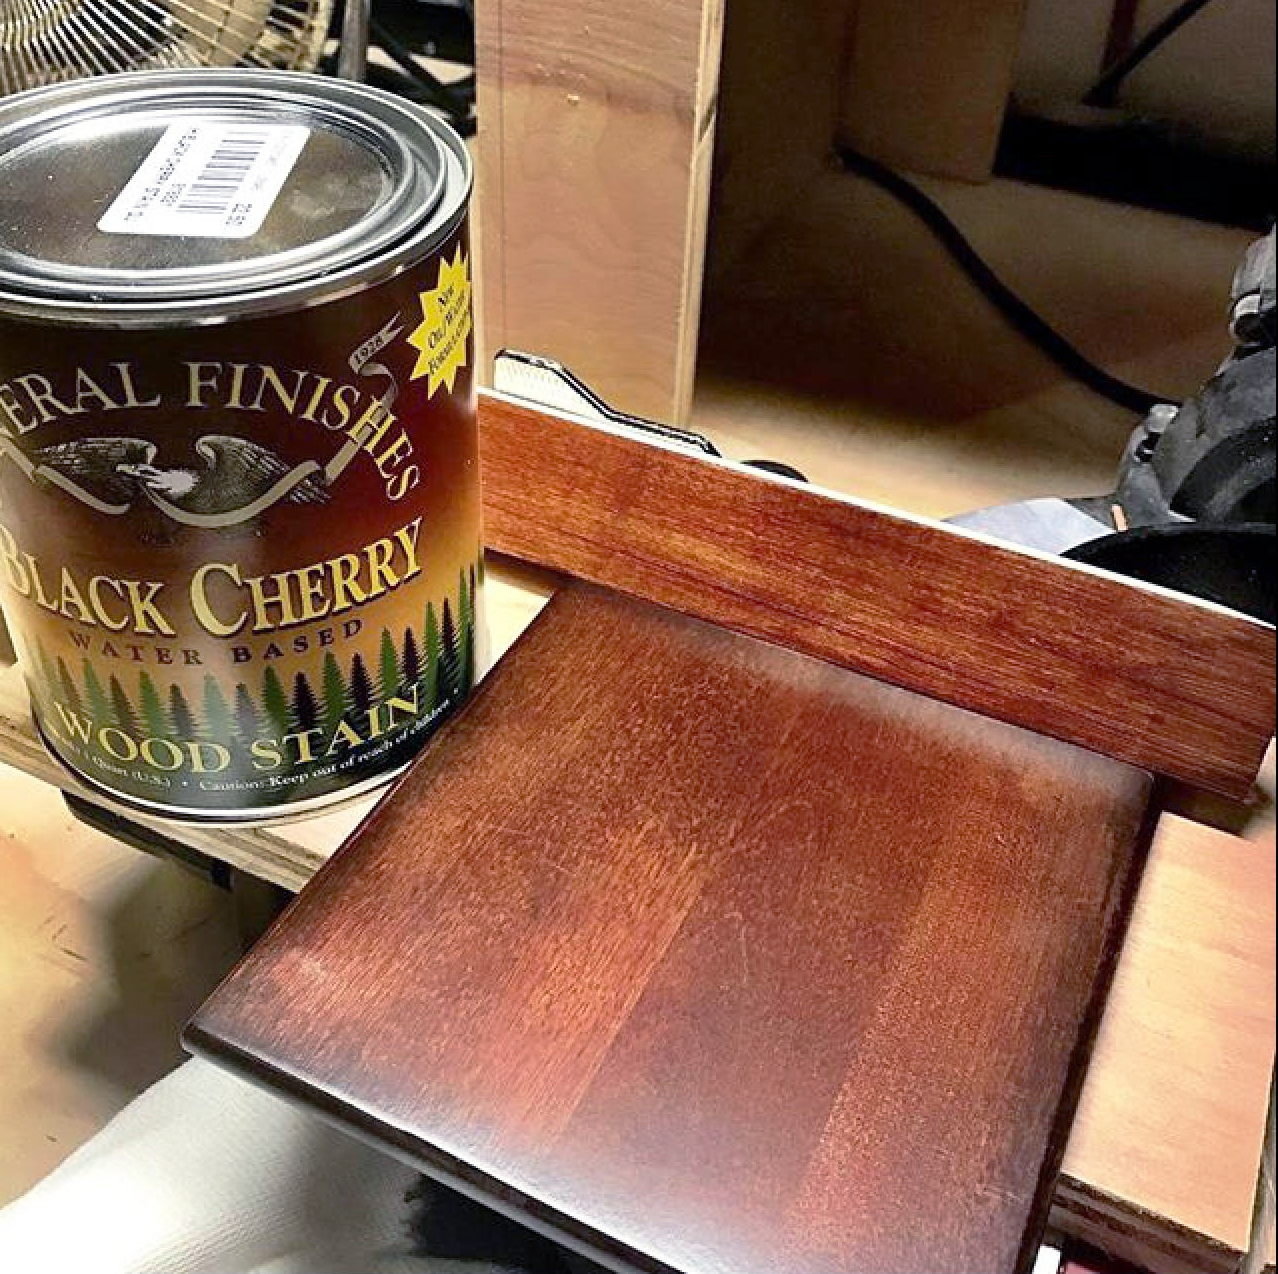 Dark Cherry Water Based Wood Stain | General Finishes ...